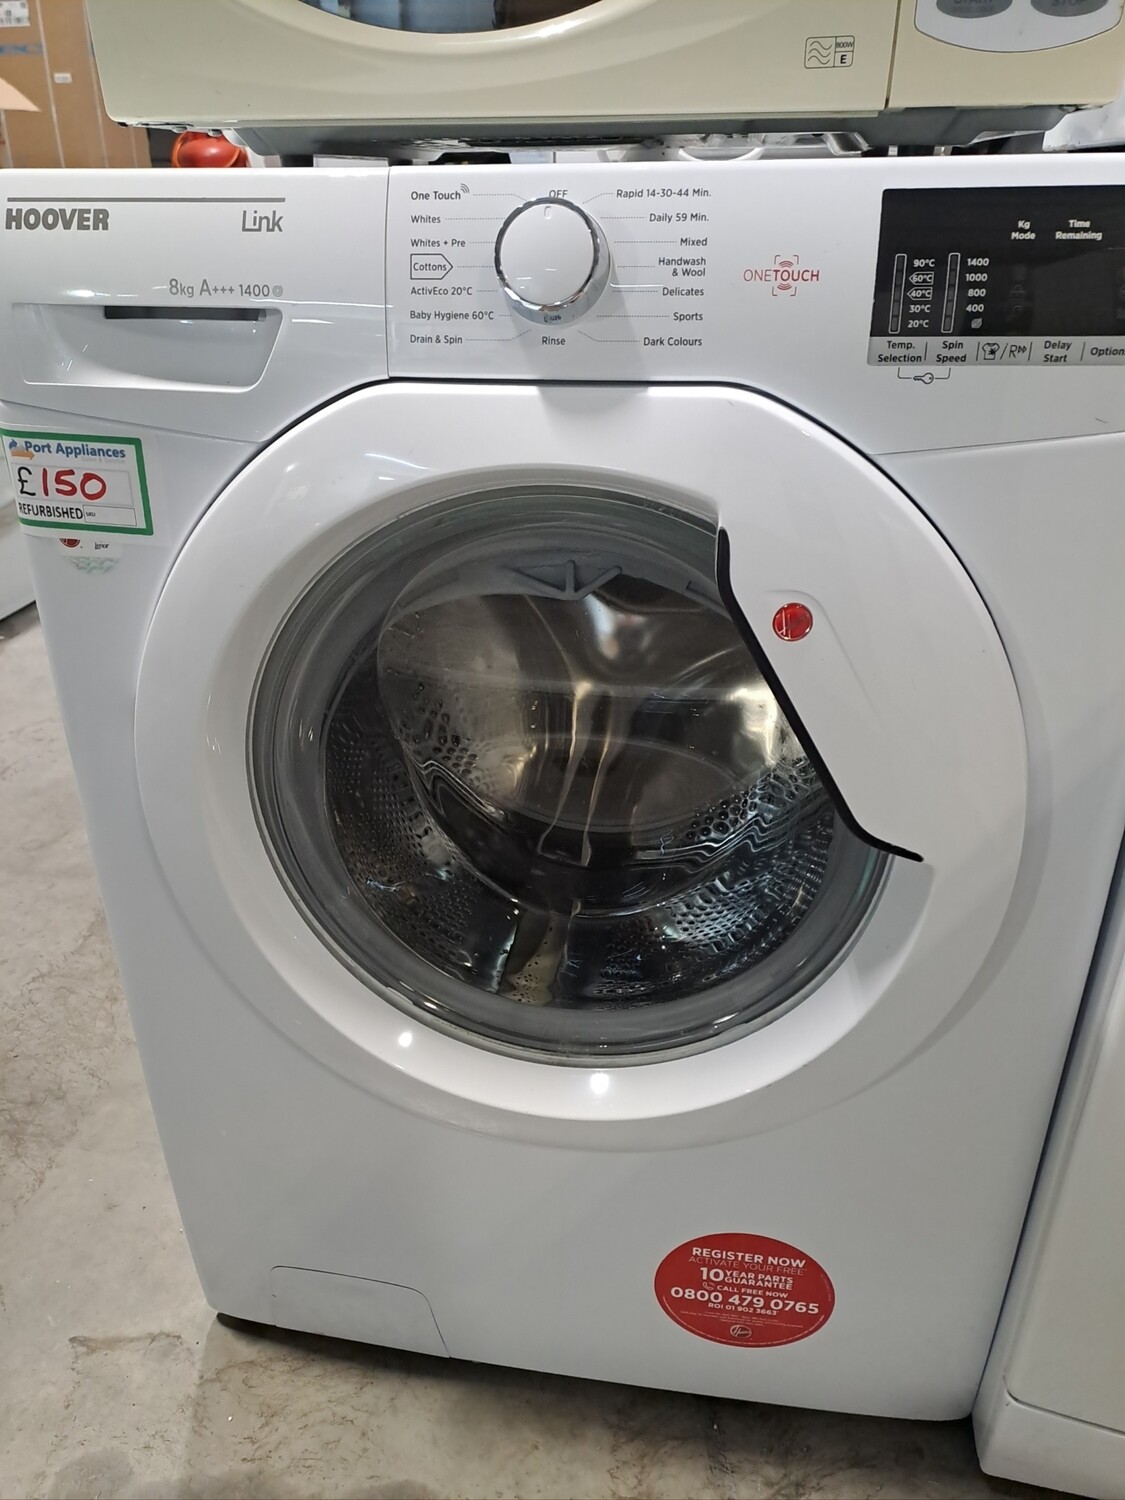 Hoover DHL1482D3.80 A+++ 8kg Load 1400 Spin Washing Machine - White - Refurbished - 6 Month Guarantee